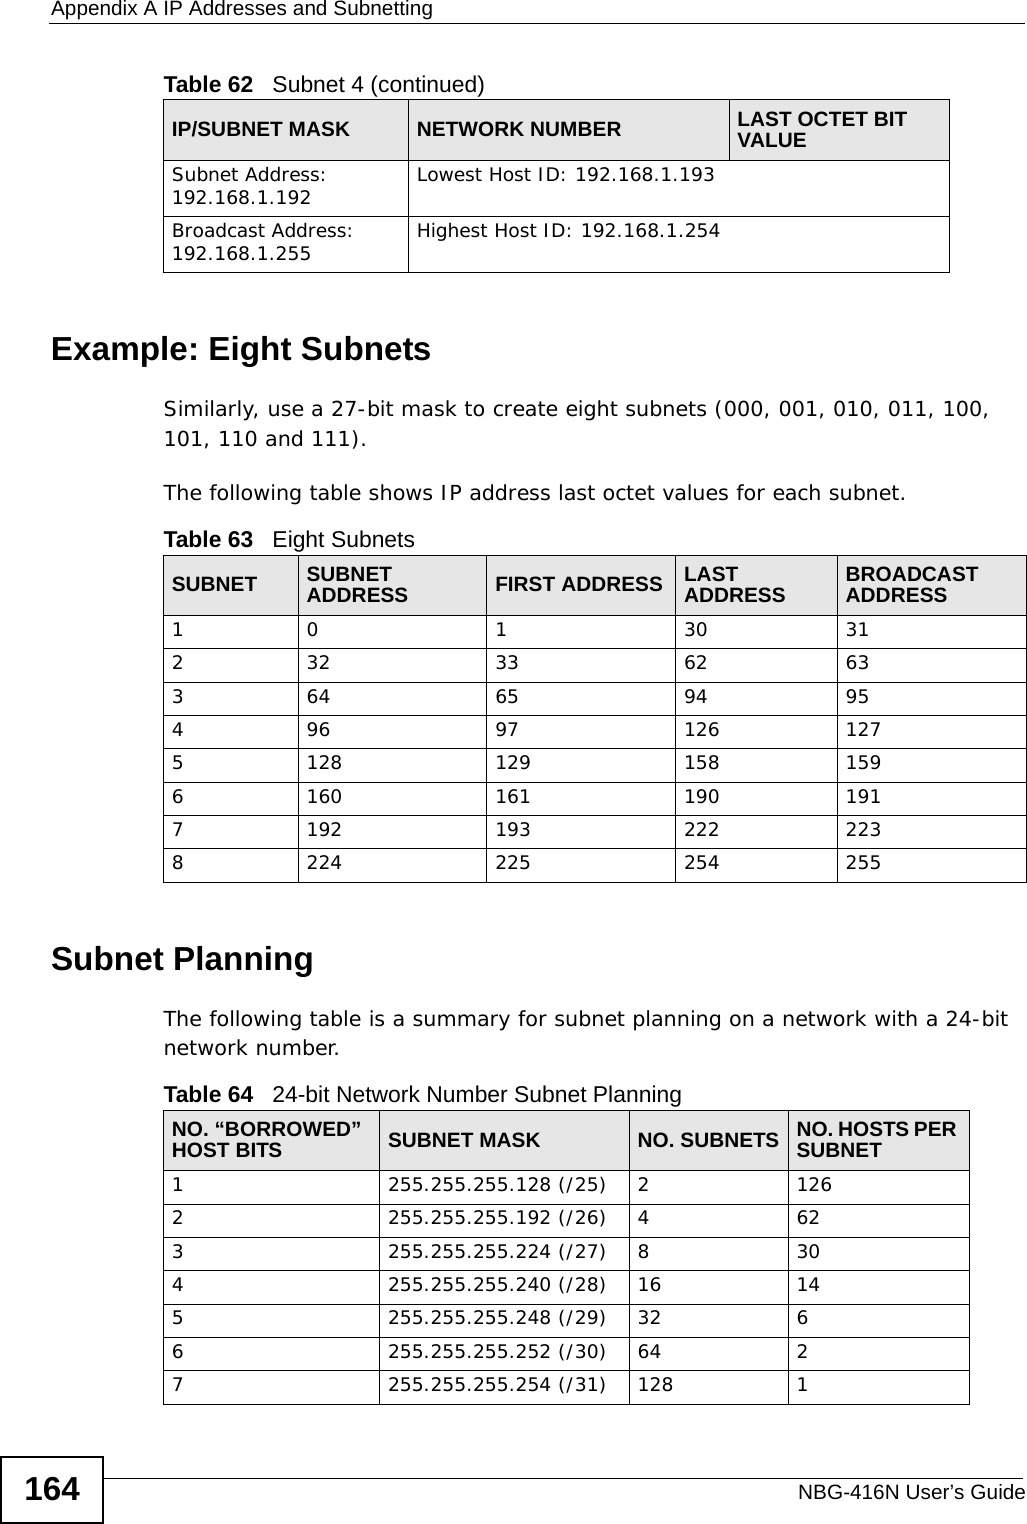 Appendix A IP Addresses and SubnettingNBG-416N User’s Guide164Example: Eight SubnetsSimilarly, use a 27-bit mask to create eight subnets (000, 001, 010, 011, 100, 101, 110 and 111). The following table shows IP address last octet values for each subnet.Subnet PlanningThe following table is a summary for subnet planning on a network with a 24-bit network number.Subnet Address: 192.168.1.192 Lowest Host ID: 192.168.1.193Broadcast Address: 192.168.1.255 Highest Host ID: 192.168.1.254Table 62   Subnet 4 (continued)IP/SUBNET MASK NETWORK NUMBER LAST OCTET BIT VALUETable 63   Eight SubnetsSUBNET SUBNET ADDRESS FIRST ADDRESS LAST ADDRESS BROADCAST ADDRESS1 0 1 30 31232 33 62 63364 65 94 95496 97 126 1275128 129 158 1596160 161 190 1917192 193 222 2238224 225 254 255Table 64   24-bit Network Number Subnet PlanningNO. “BORROWED” HOST BITS SUBNET MASK NO. SUBNETS NO. HOSTS PER SUBNET1255.255.255.128 (/25) 21262255.255.255.192 (/26) 4623255.255.255.224 (/27) 8304255.255.255.240 (/28) 16 145255.255.255.248 (/29) 32 66255.255.255.252 (/30) 64 27255.255.255.254 (/31) 128 1